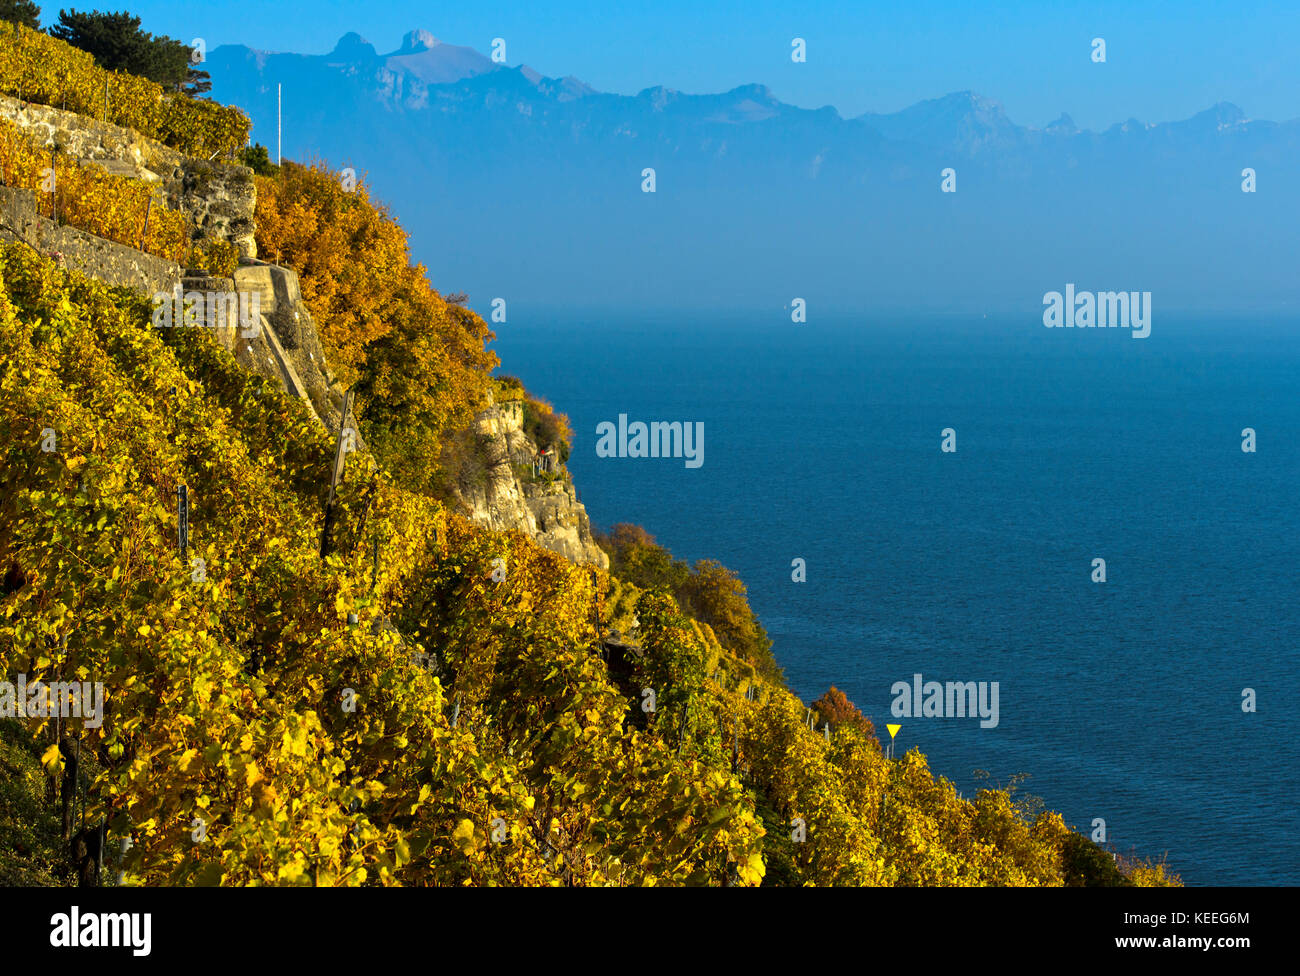 Vineyards in steep terrace cultivation rising above Lake Geneva in the Lavaux wine-growing area, Rivaz, Vaud, Switzerland Stock Photo